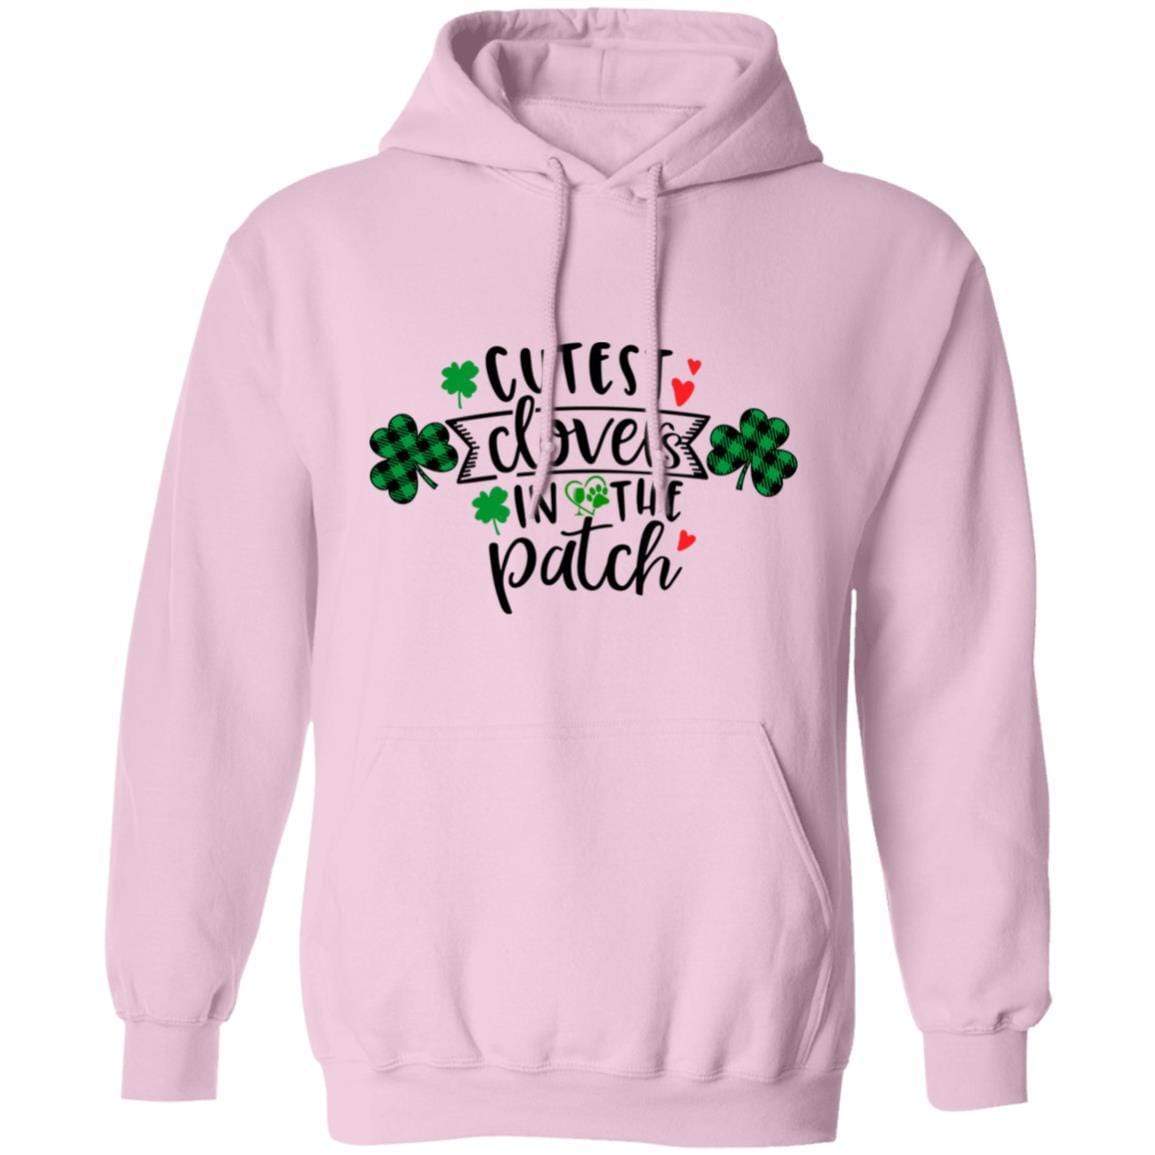 Sweatshirts Light Pink / S Winey Bitches Co "Cutest Clovers in the Patch" Pullover Hoodie 8 oz. WineyBitchesCo